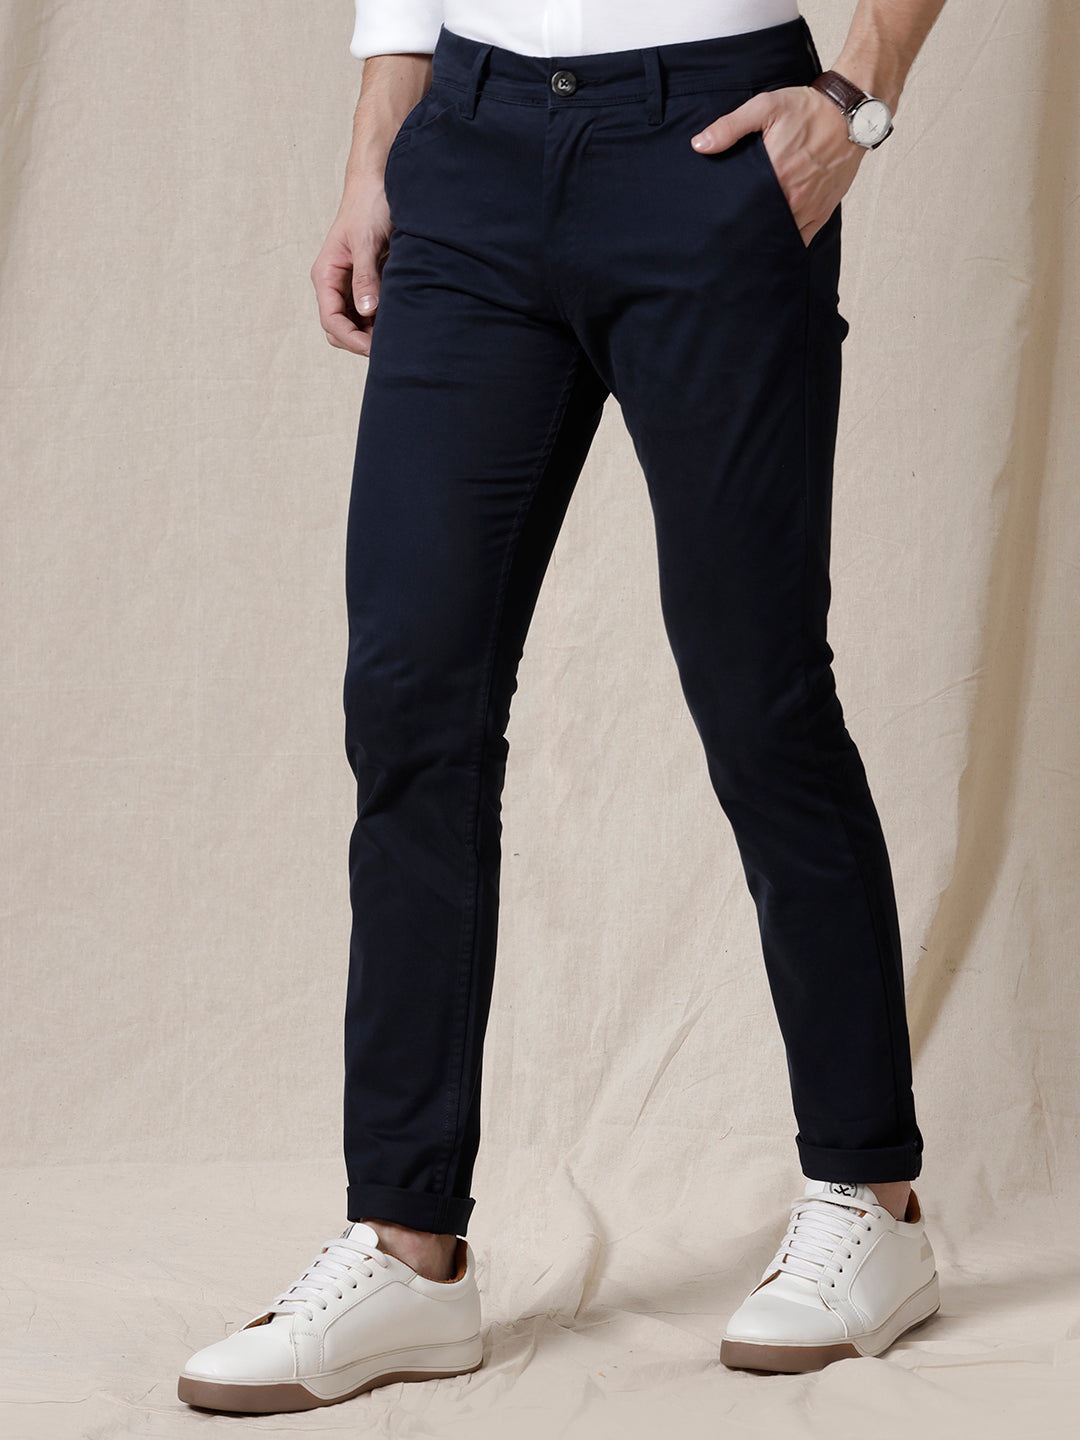 Classic Navy Chinos Trousers